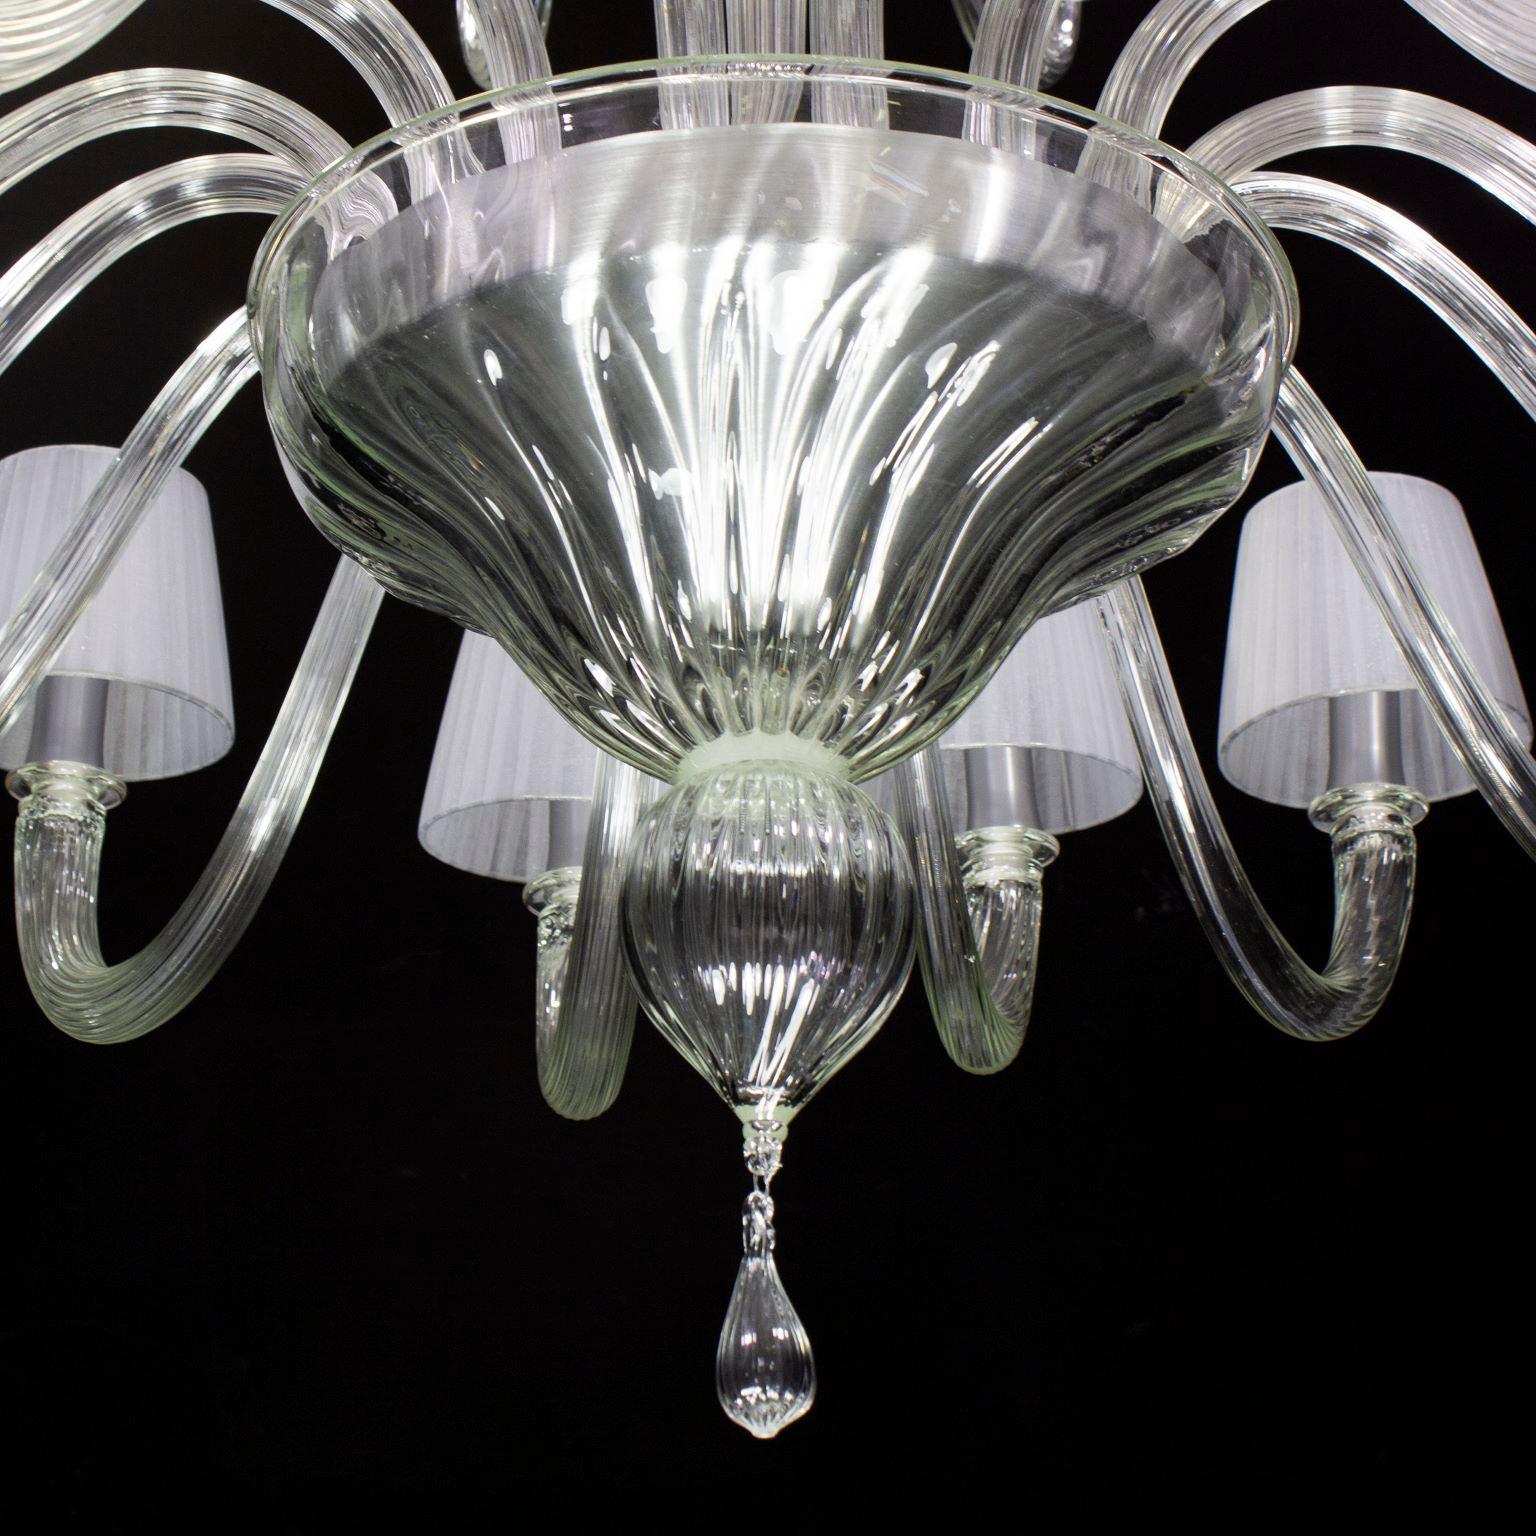 Italian Chandelier 16+8 Arms Crystal Murano Glass Handmade Lampshades by Multiforme For Sale